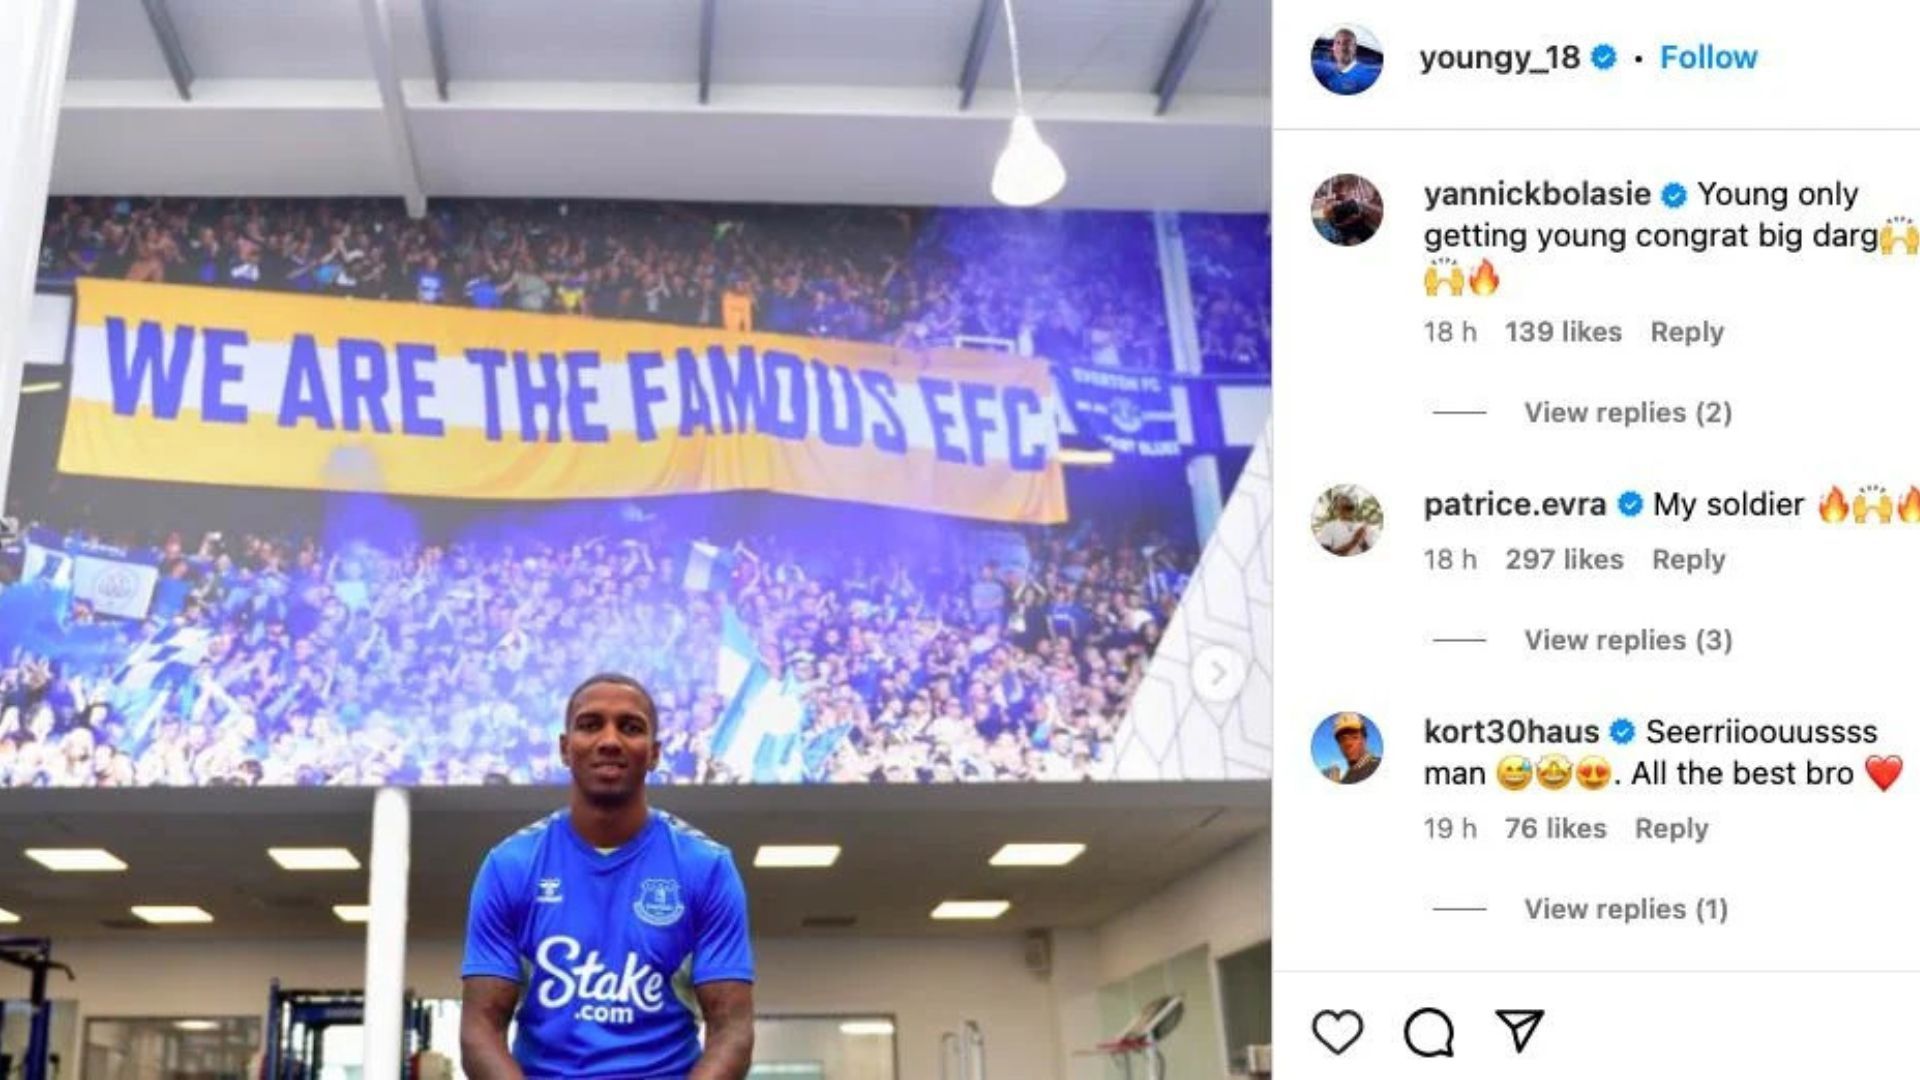 Patrice Evra&#039;s comment under Ashley Young&#039;s post (Image courtesy of Goodison News).